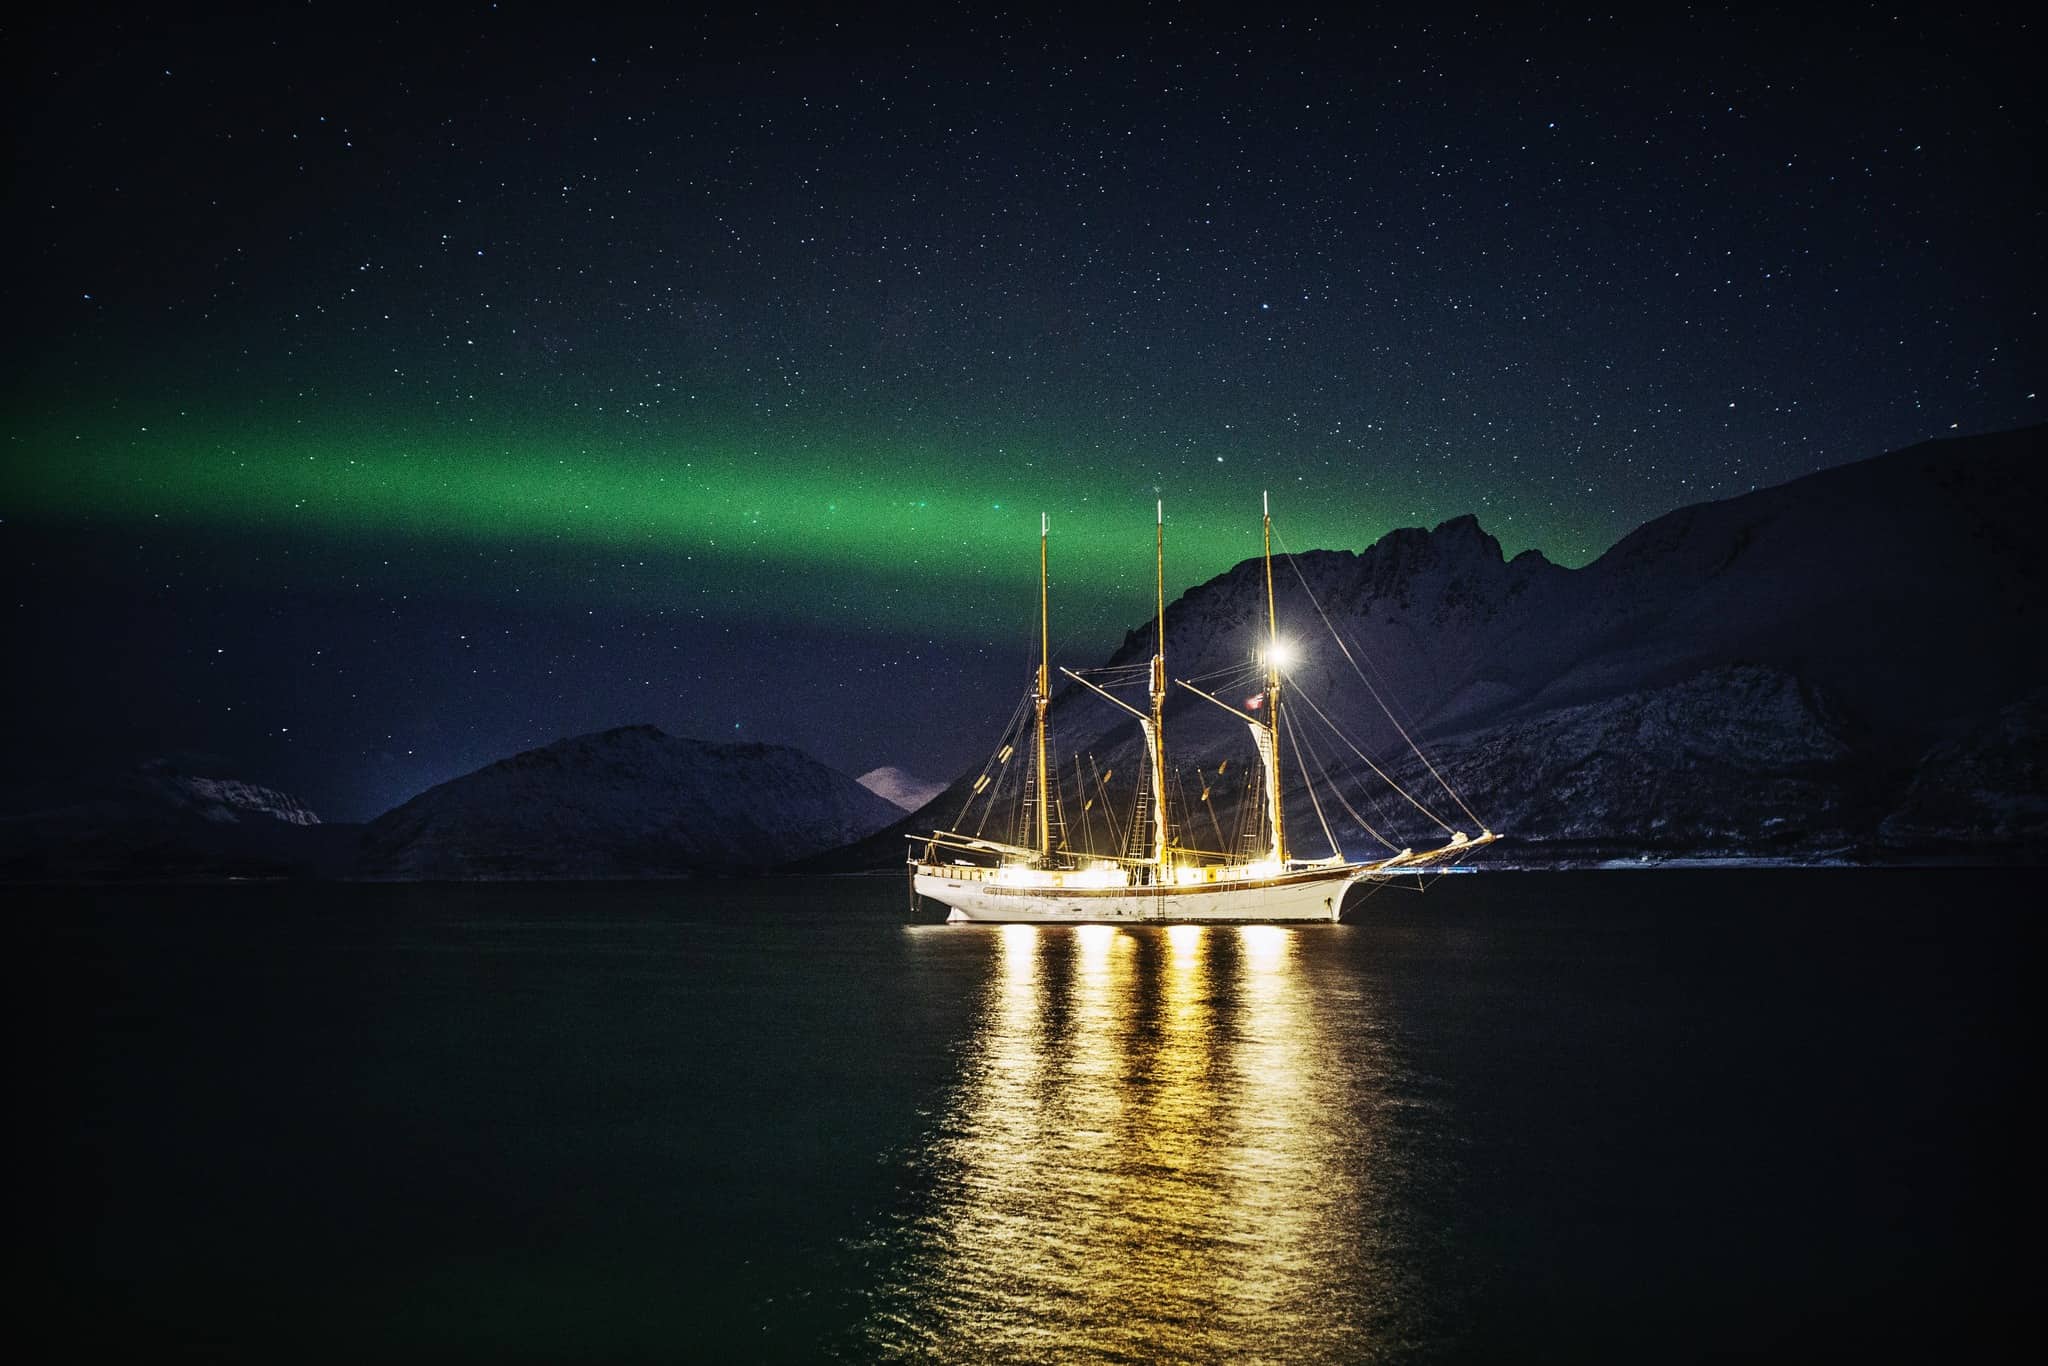 Sailing ship Linden at anchor in Svalbard, with a starry sky and the green glow of the Northern Lights.